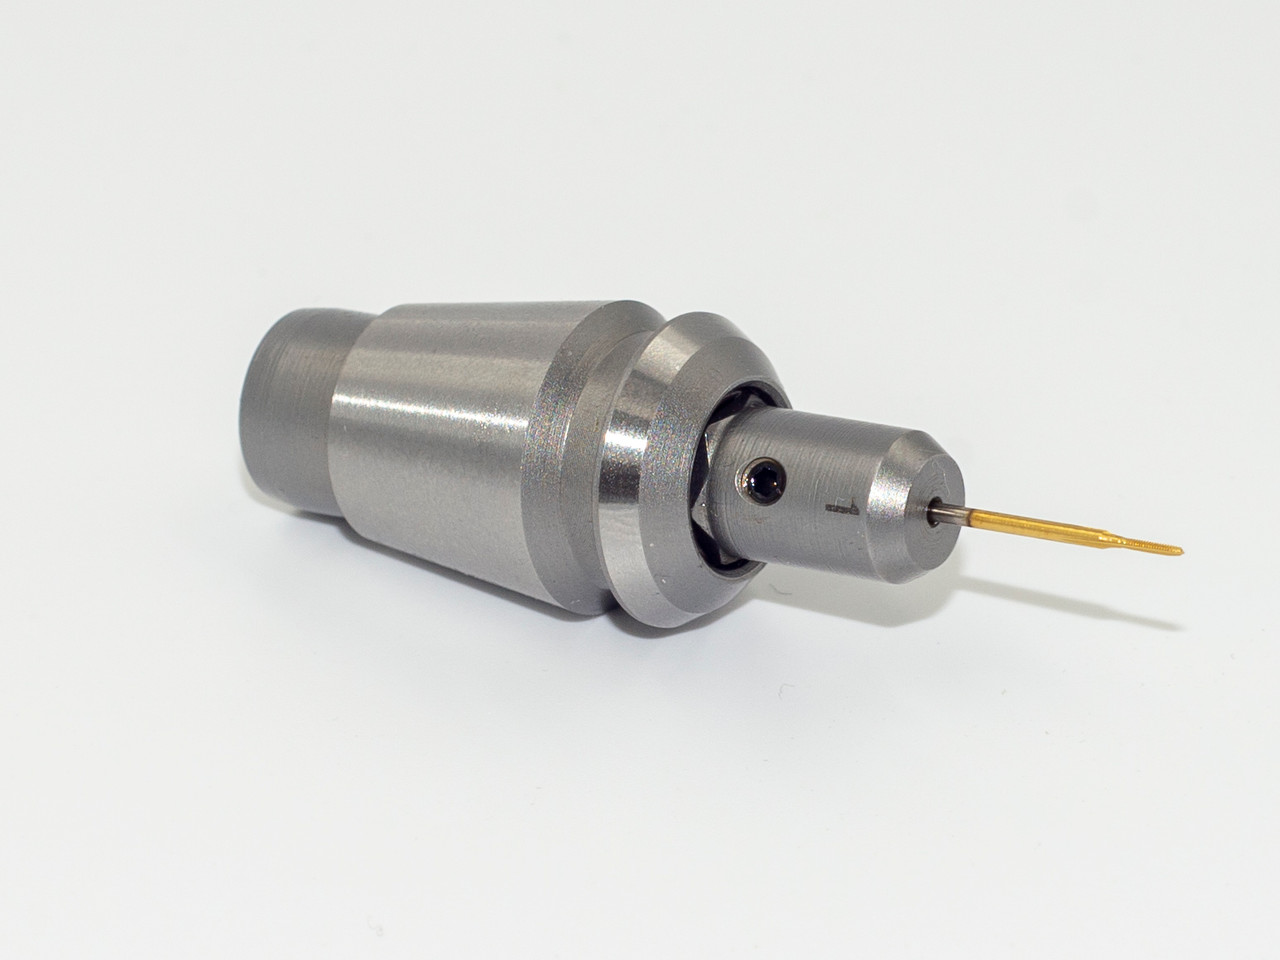 This Tapping  collet is for Taps with a 1.00m shank diameter.  Tapping collets, fit ER-16 collet holders,  Select the collet that fits the shank of your tap.  These spring loaded collets fits shank sizes 1.0mm, 1.5mm and 2.0mm. 